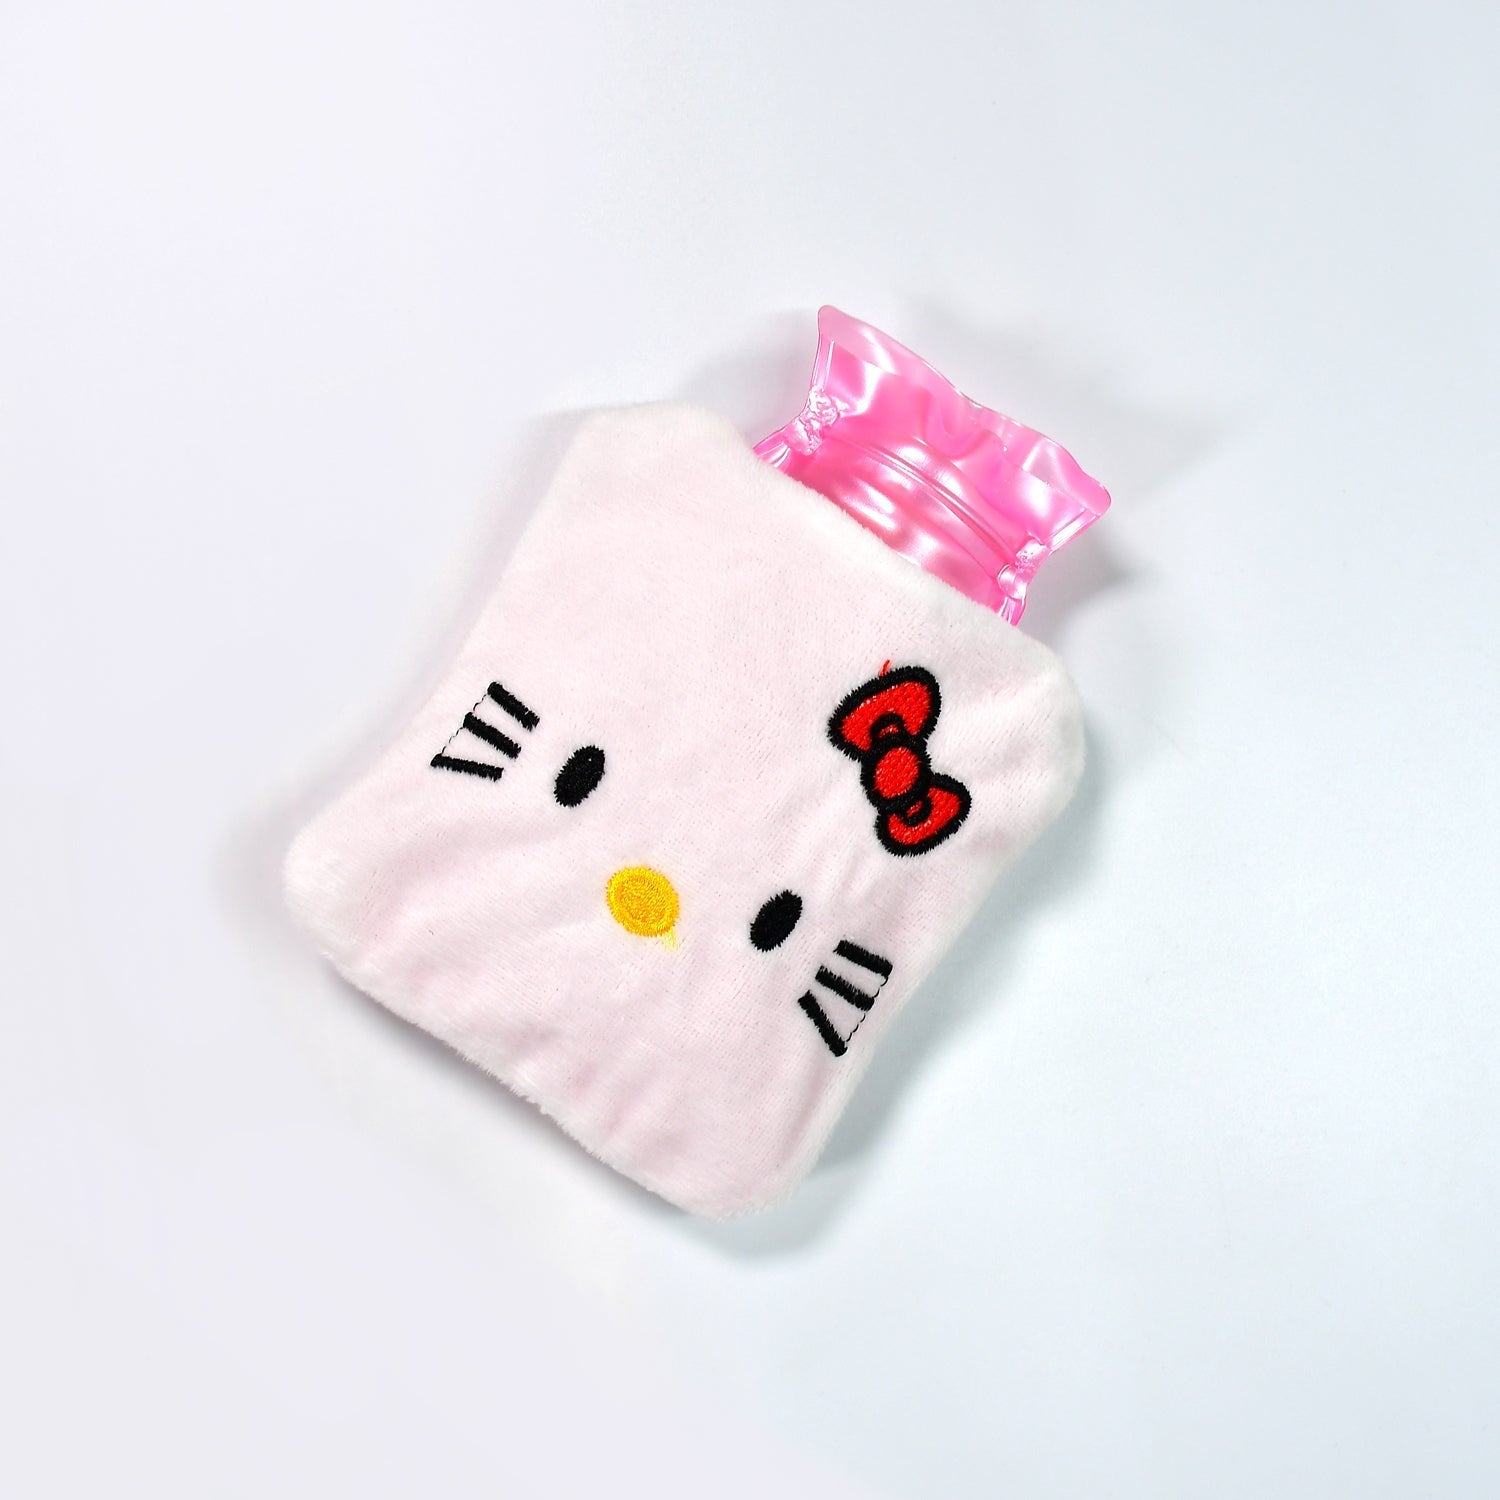 6526 White Hello Kitty small Hot Water Bag with Cover for Pain Relief, Neck, Shoulder Pain and Hand, Feet Warmer, Menstrual Cramps. DeoDap